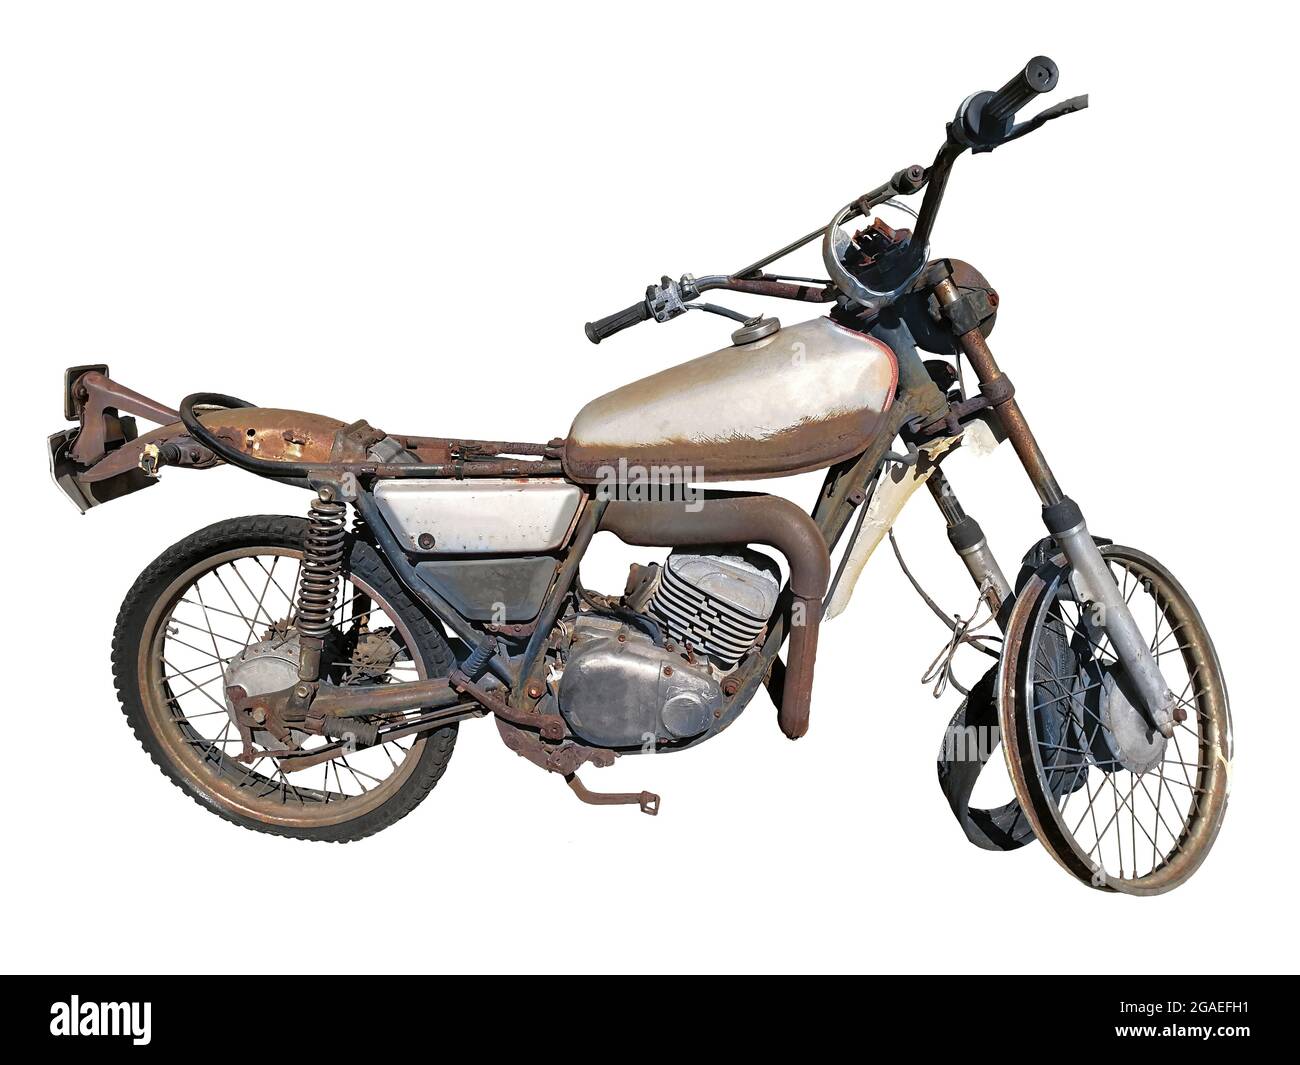 Motorcycle old retro dilapidated rust can not be used. White background Stock Photo